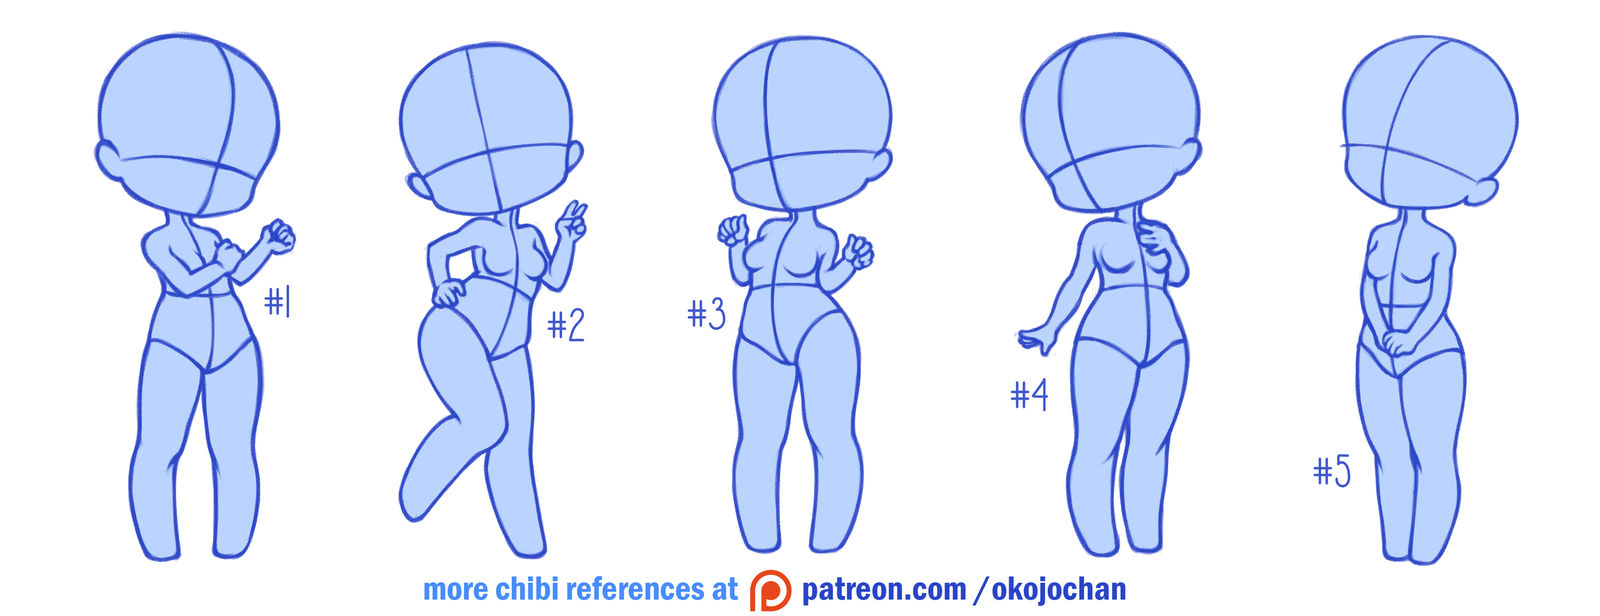 Ych Base Cute Girls Pictures 2016 Images Hd Free Images Chibi Poses Reference Chibi Base Set 2 By Nukababe On Please include the name of the source anime in your title. ych